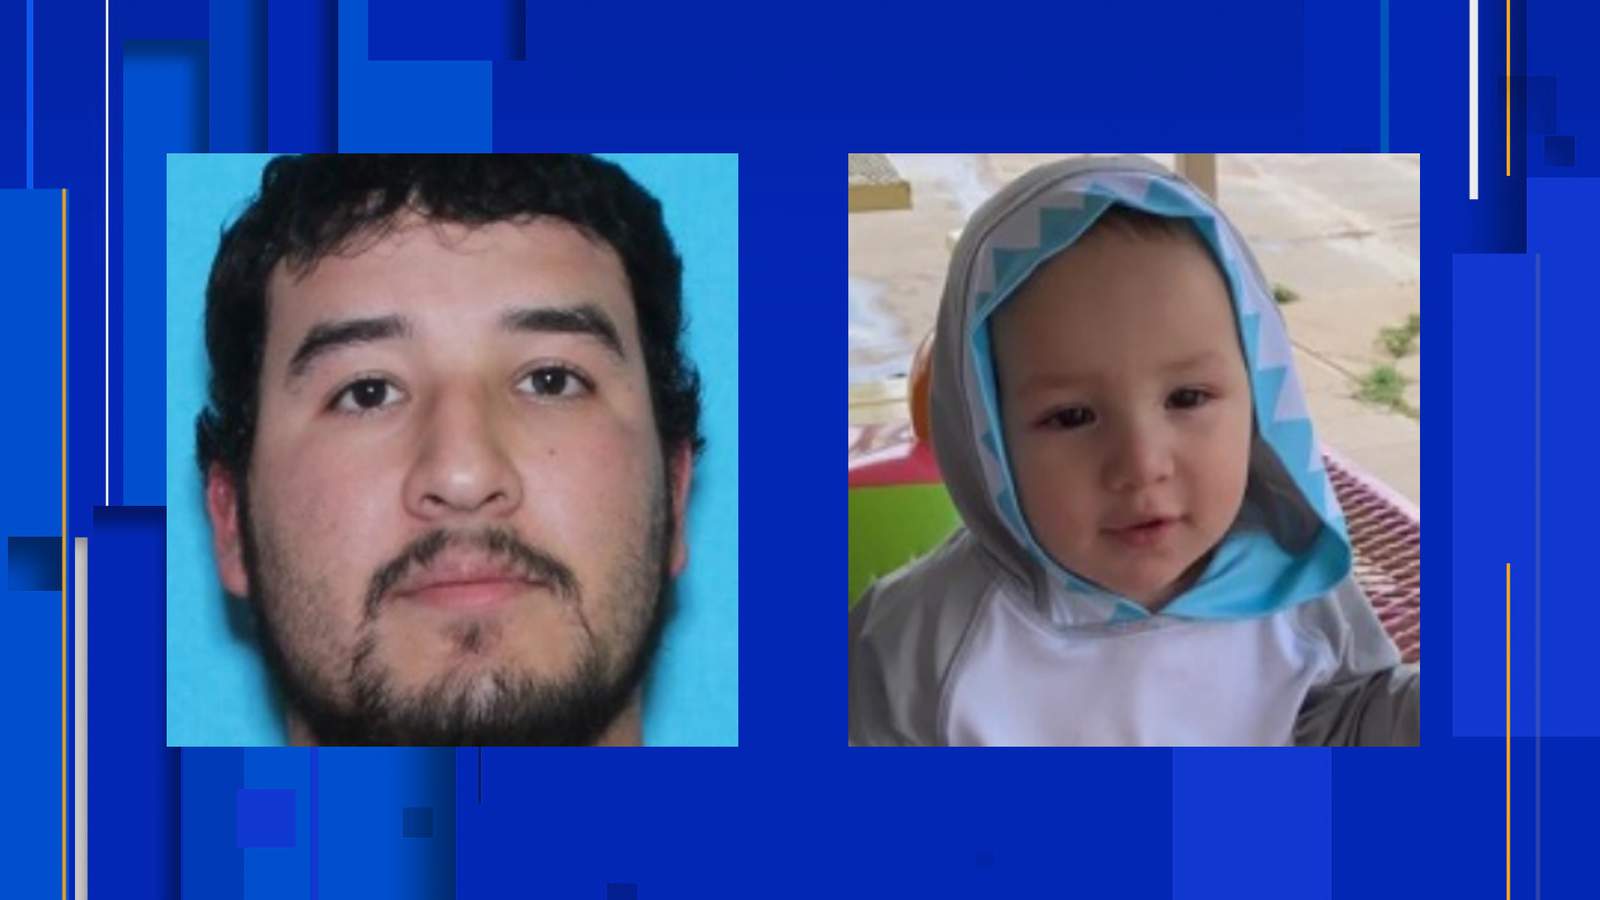 AMBER Alert discontinued for abducted 14-month-old boy, officials say